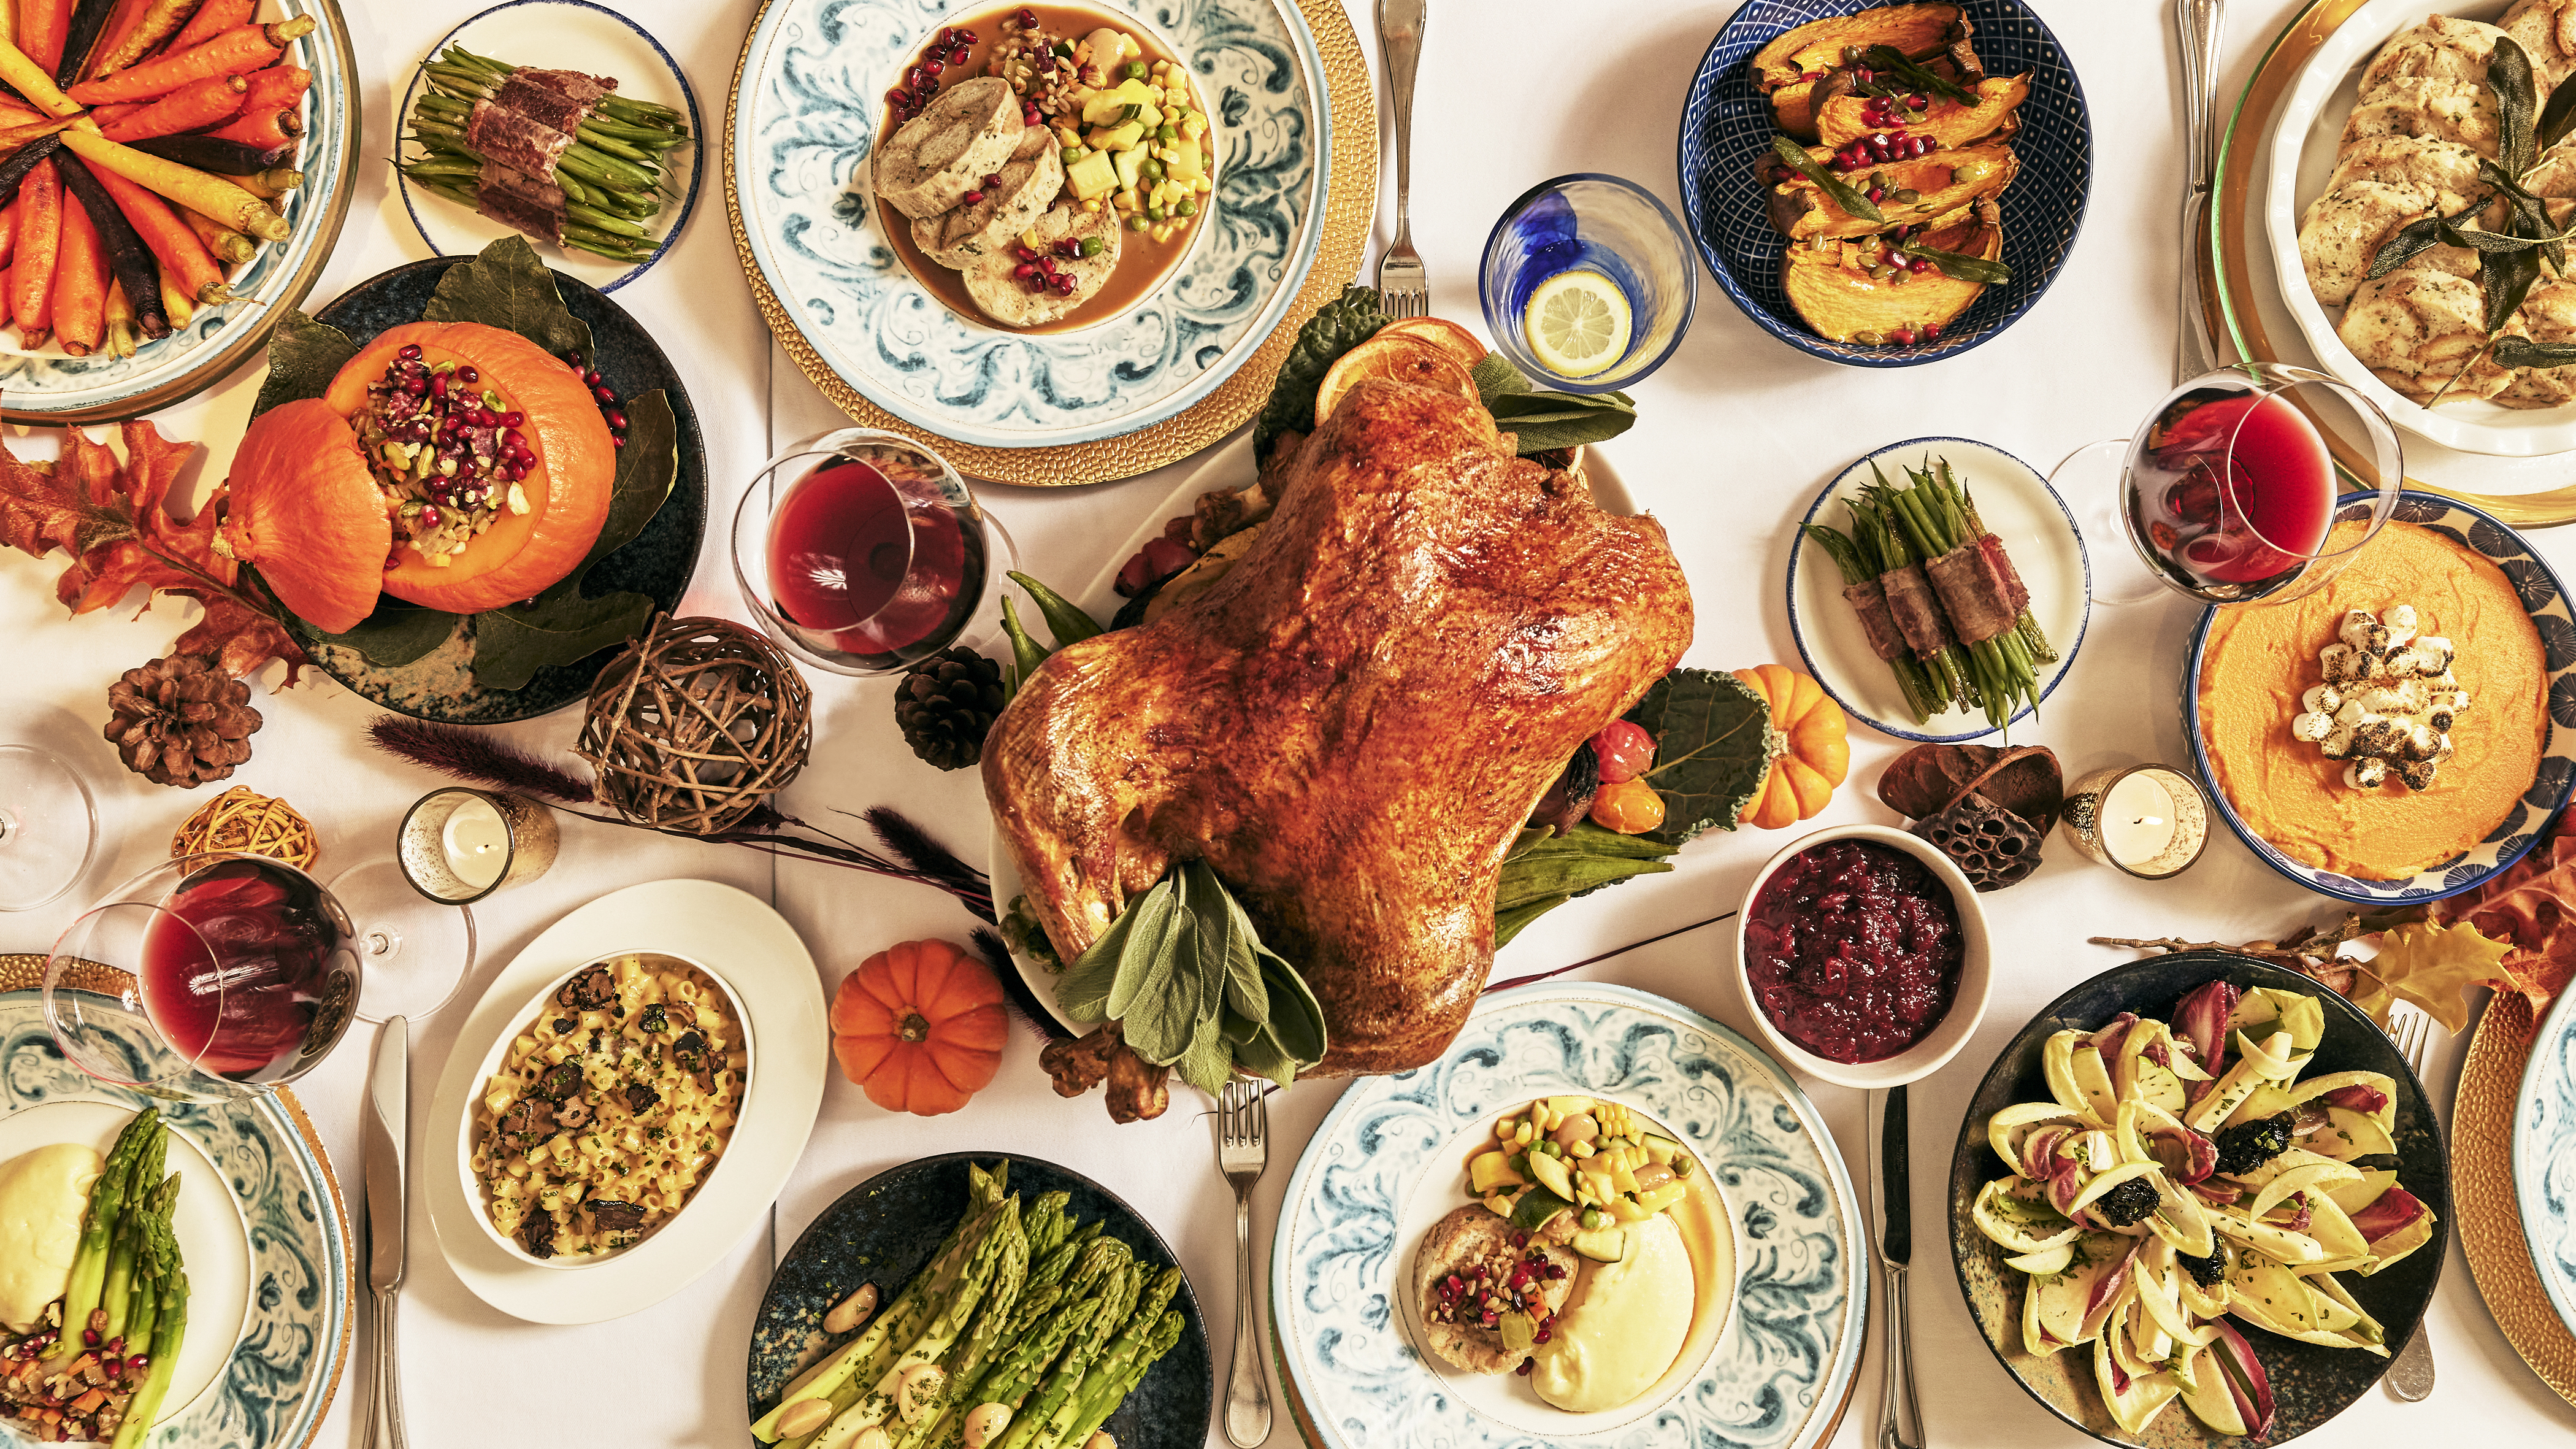 Thanksgiving dinner spread at the Peninsula Beverly Hills.